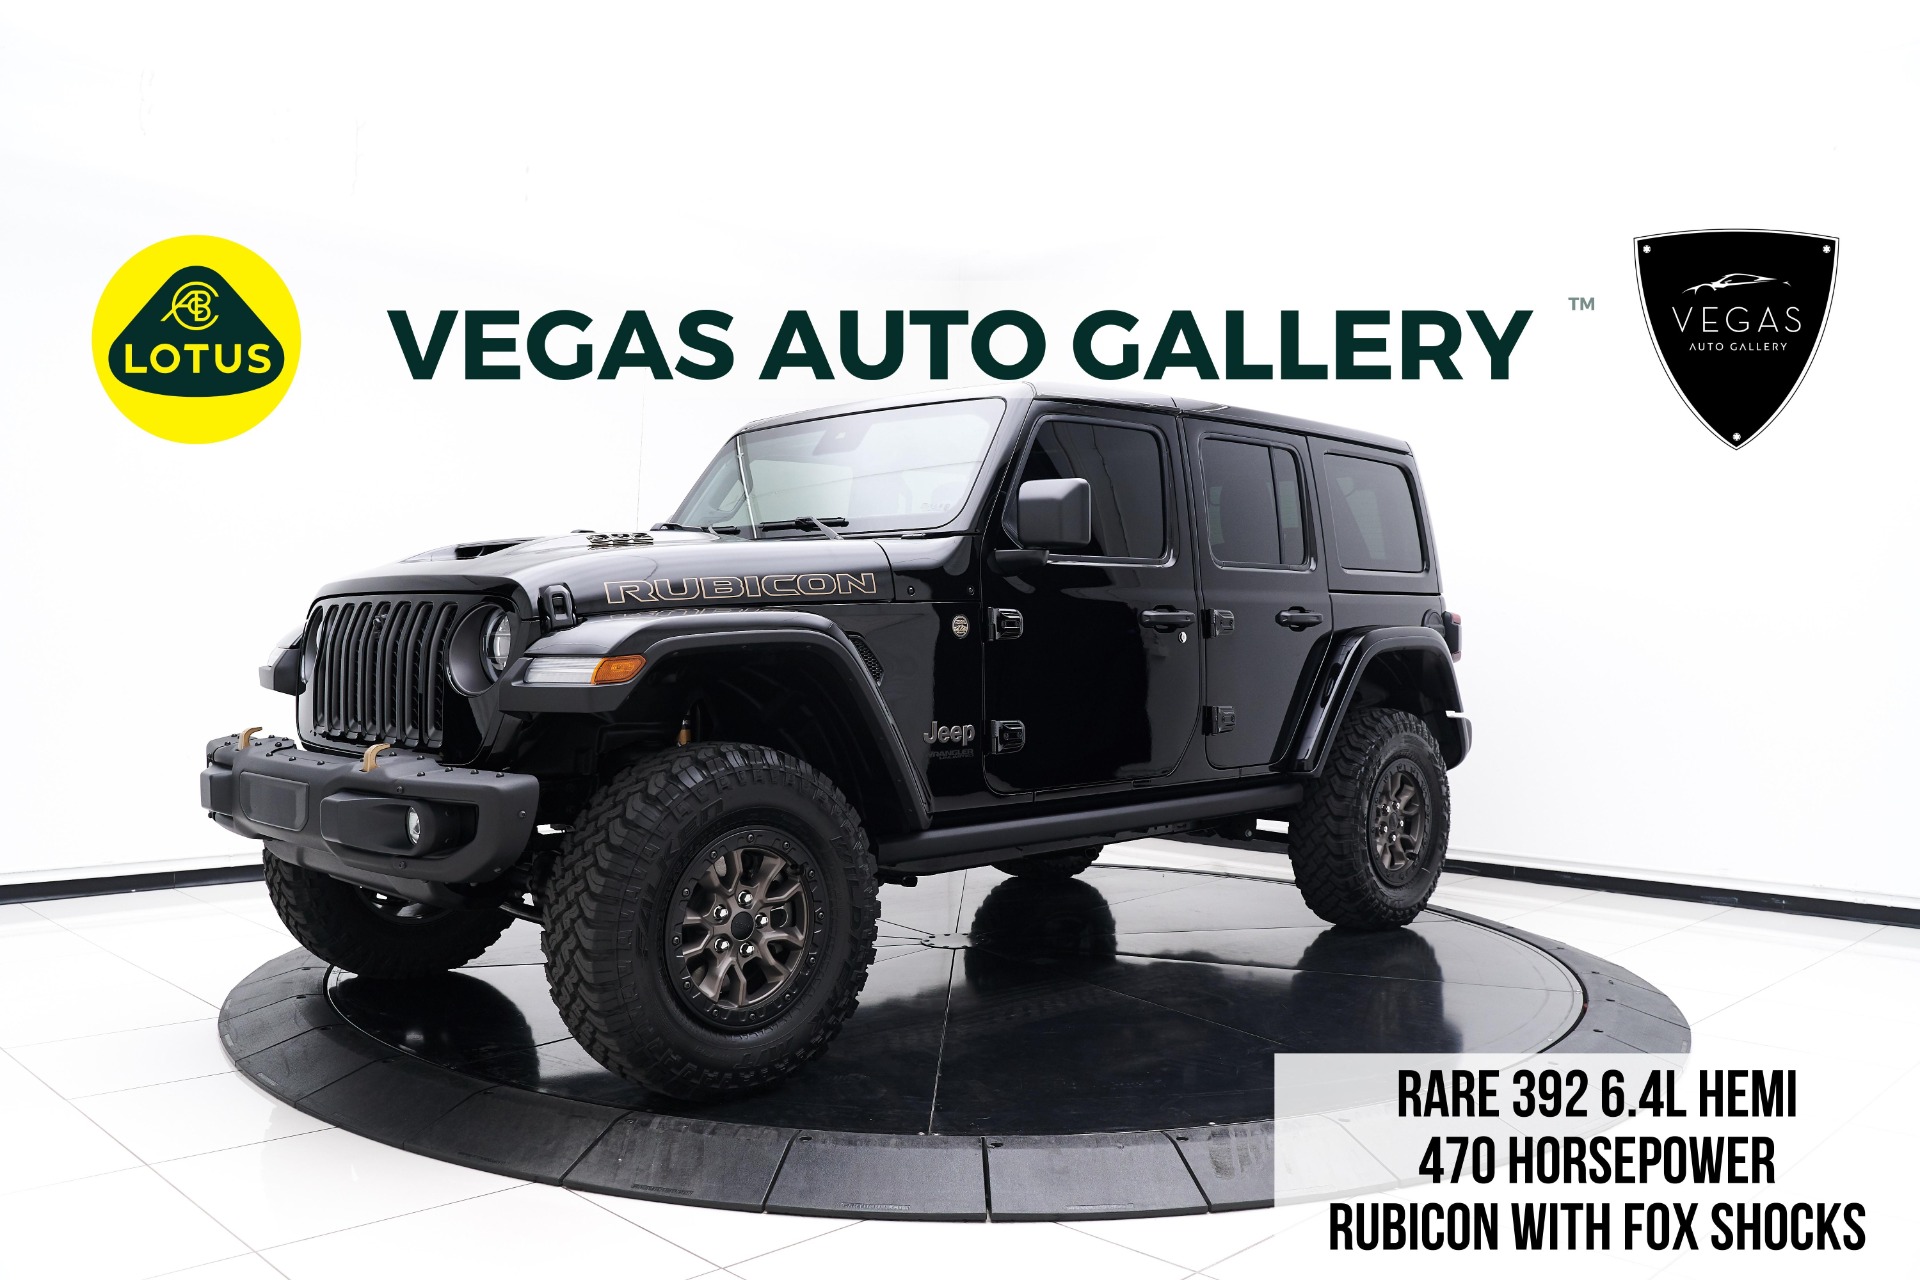 Used 2022 Jeep Wrangler Unlimited Rubicon 392 For Sale (Sold) | Lotus Cars  Las Vegas Stock #V112590